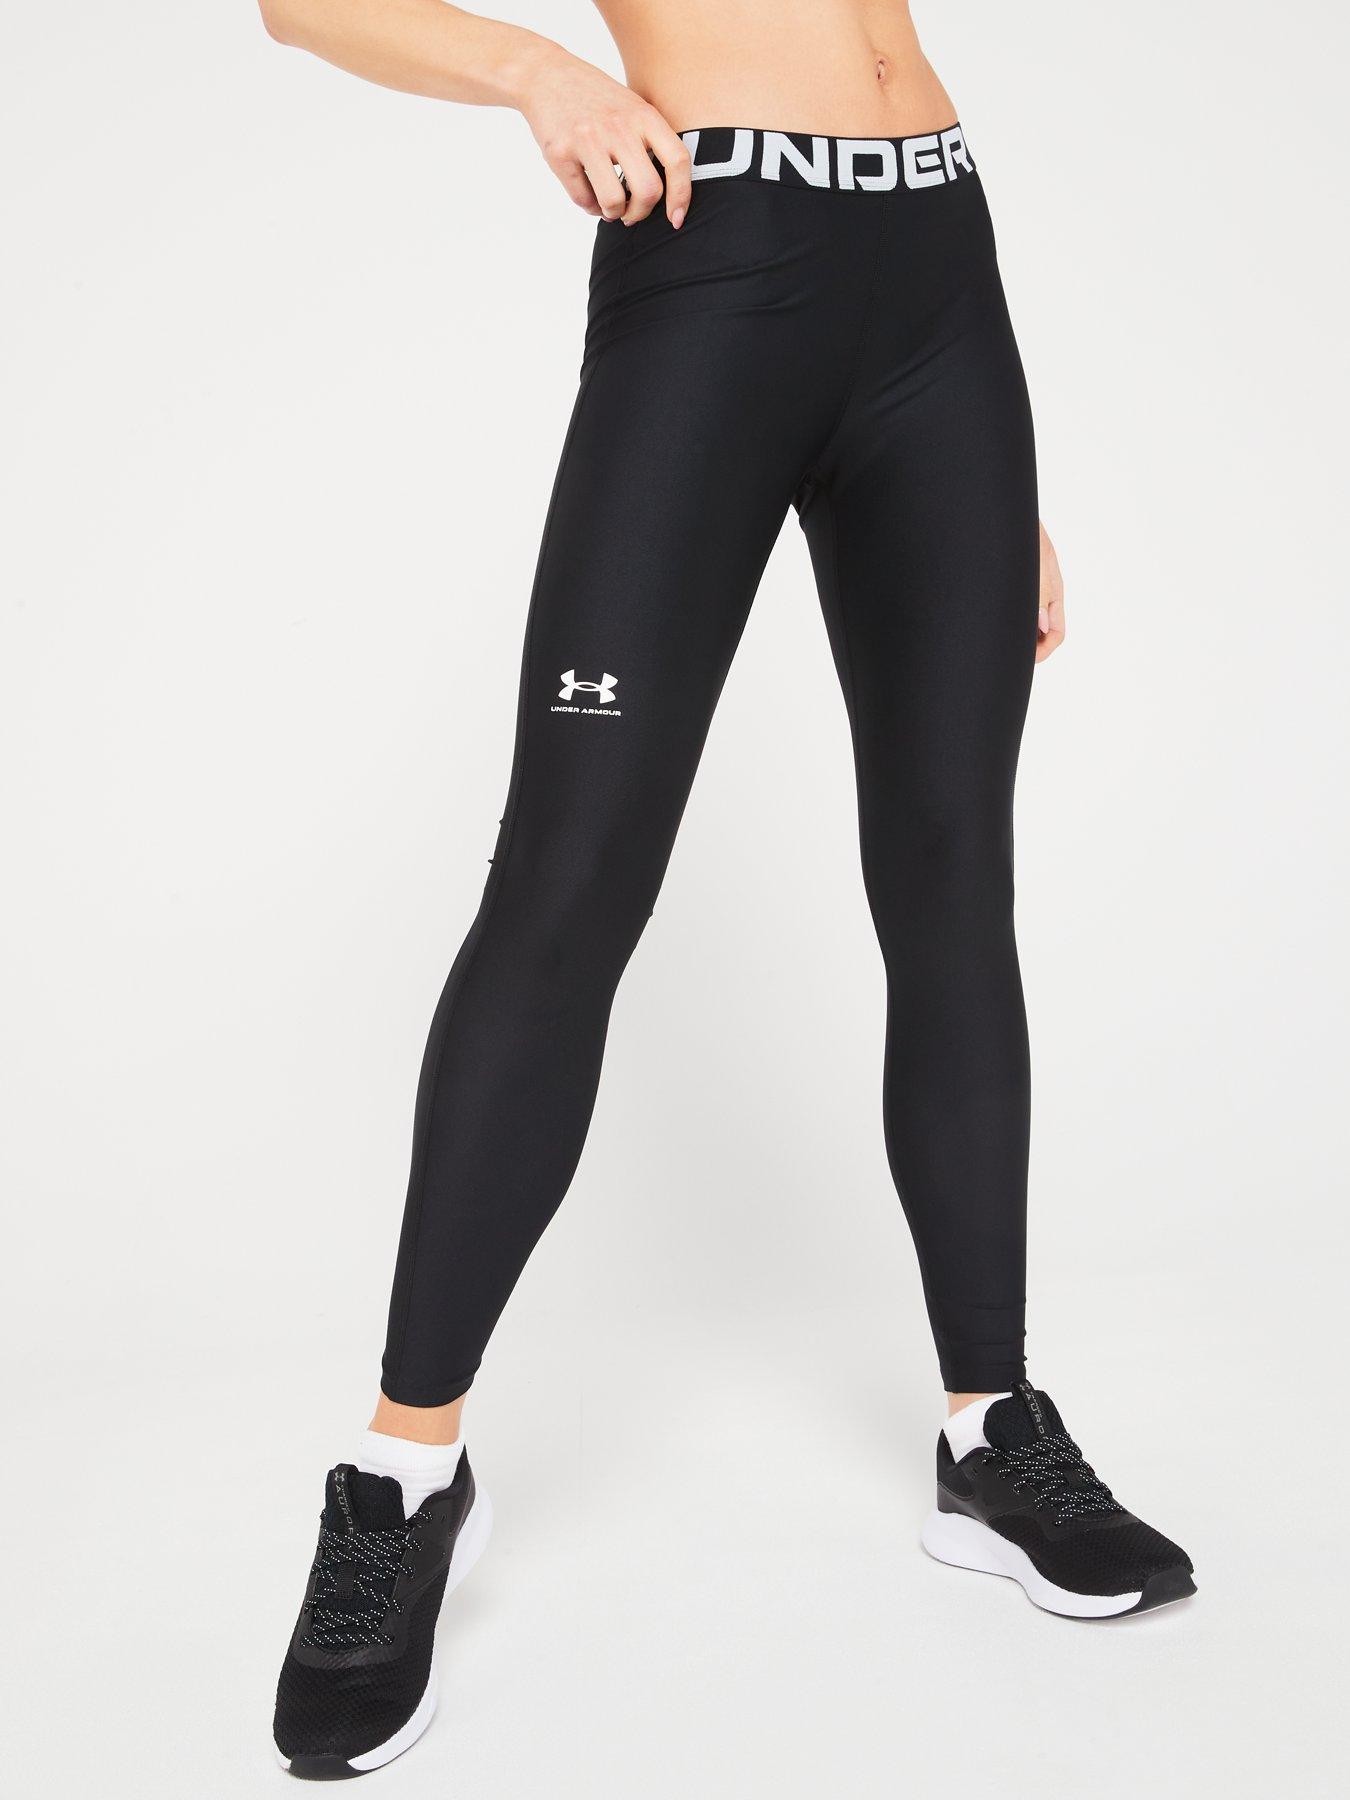 UNDER ARMOUR Women's Clothing